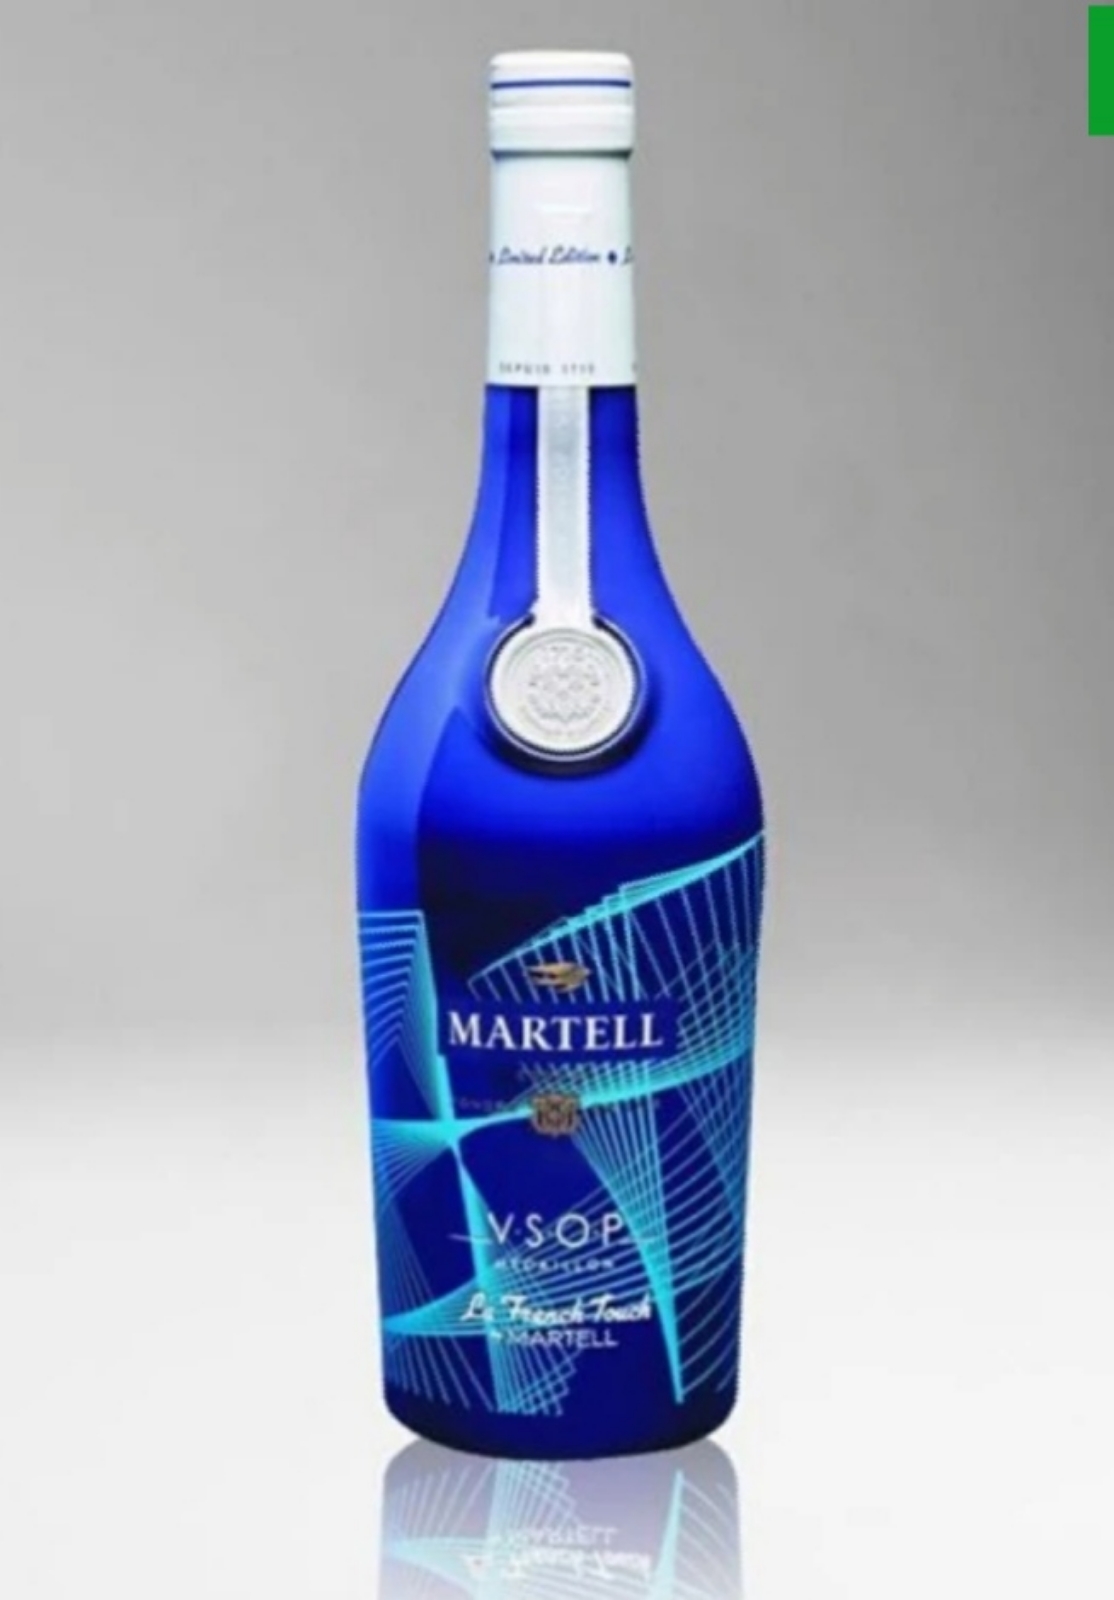 Martell vsop LaFrench Touch